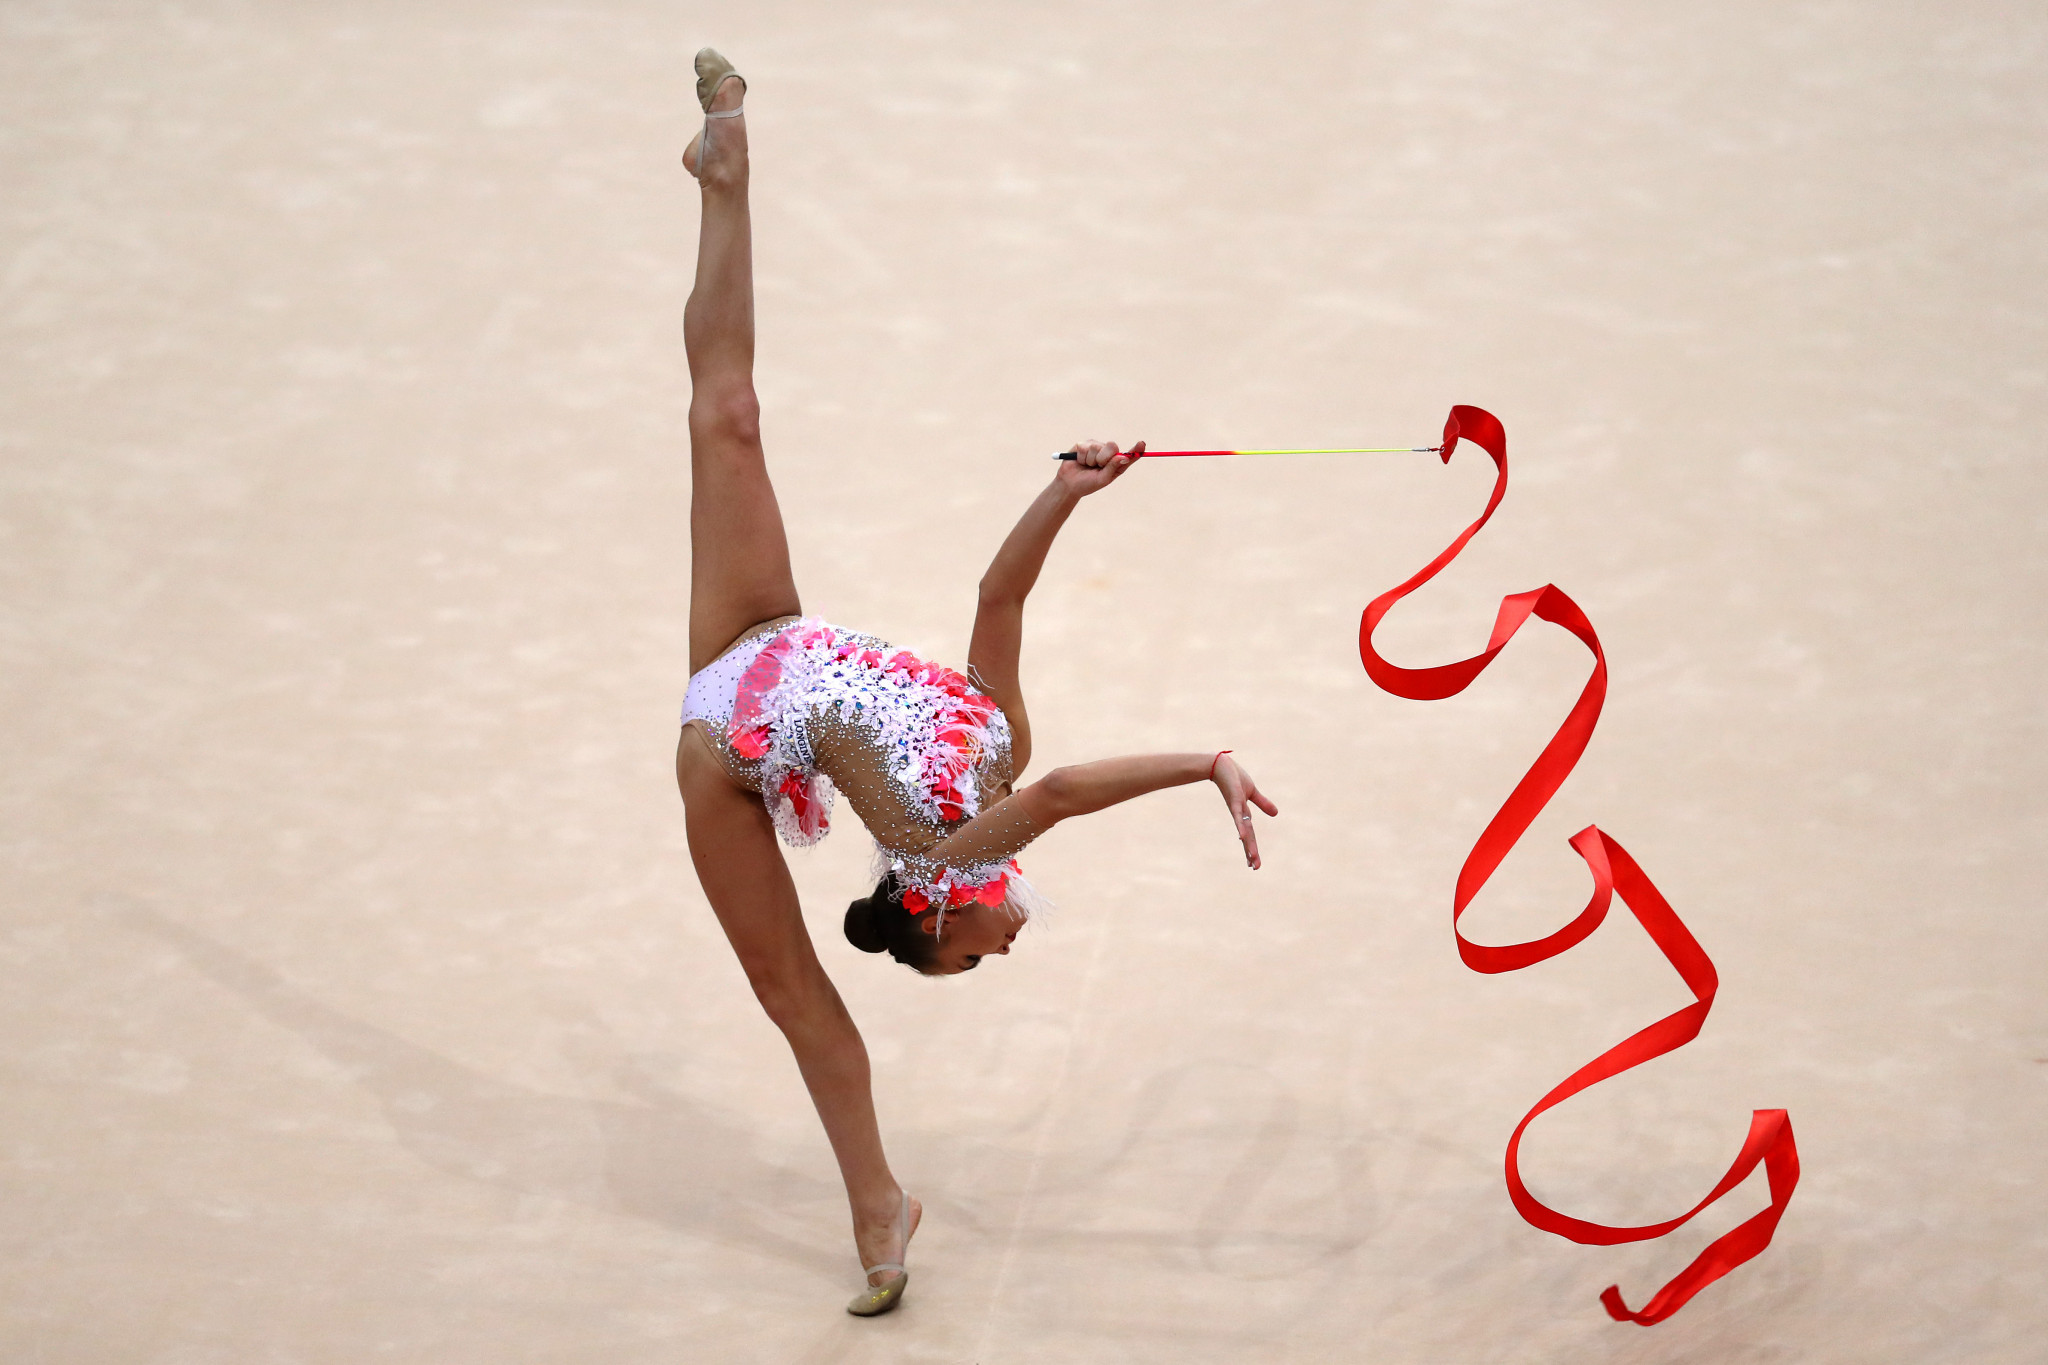 Russia's Dina Averina earned two more gold European Games medals, the first coming in the women's ribbon ©Minsk 2019